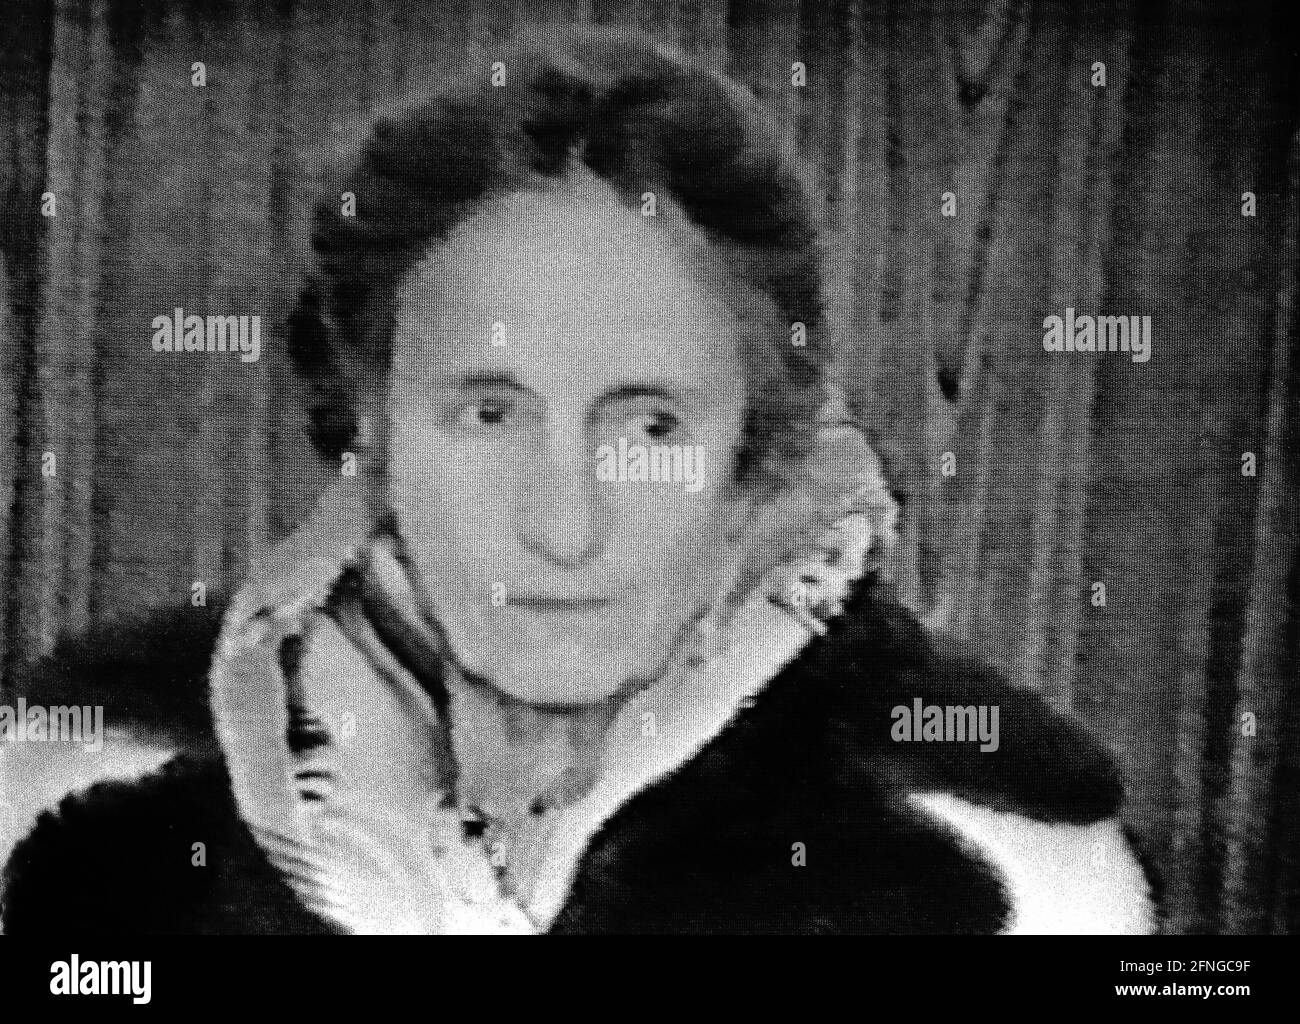 Romania, Bucharest , 25.12.1989. Archive No.: 12-02-08 Ceausescu before military court Photo:Elena Ceausescu before the military court [automated translation] Stock Photo